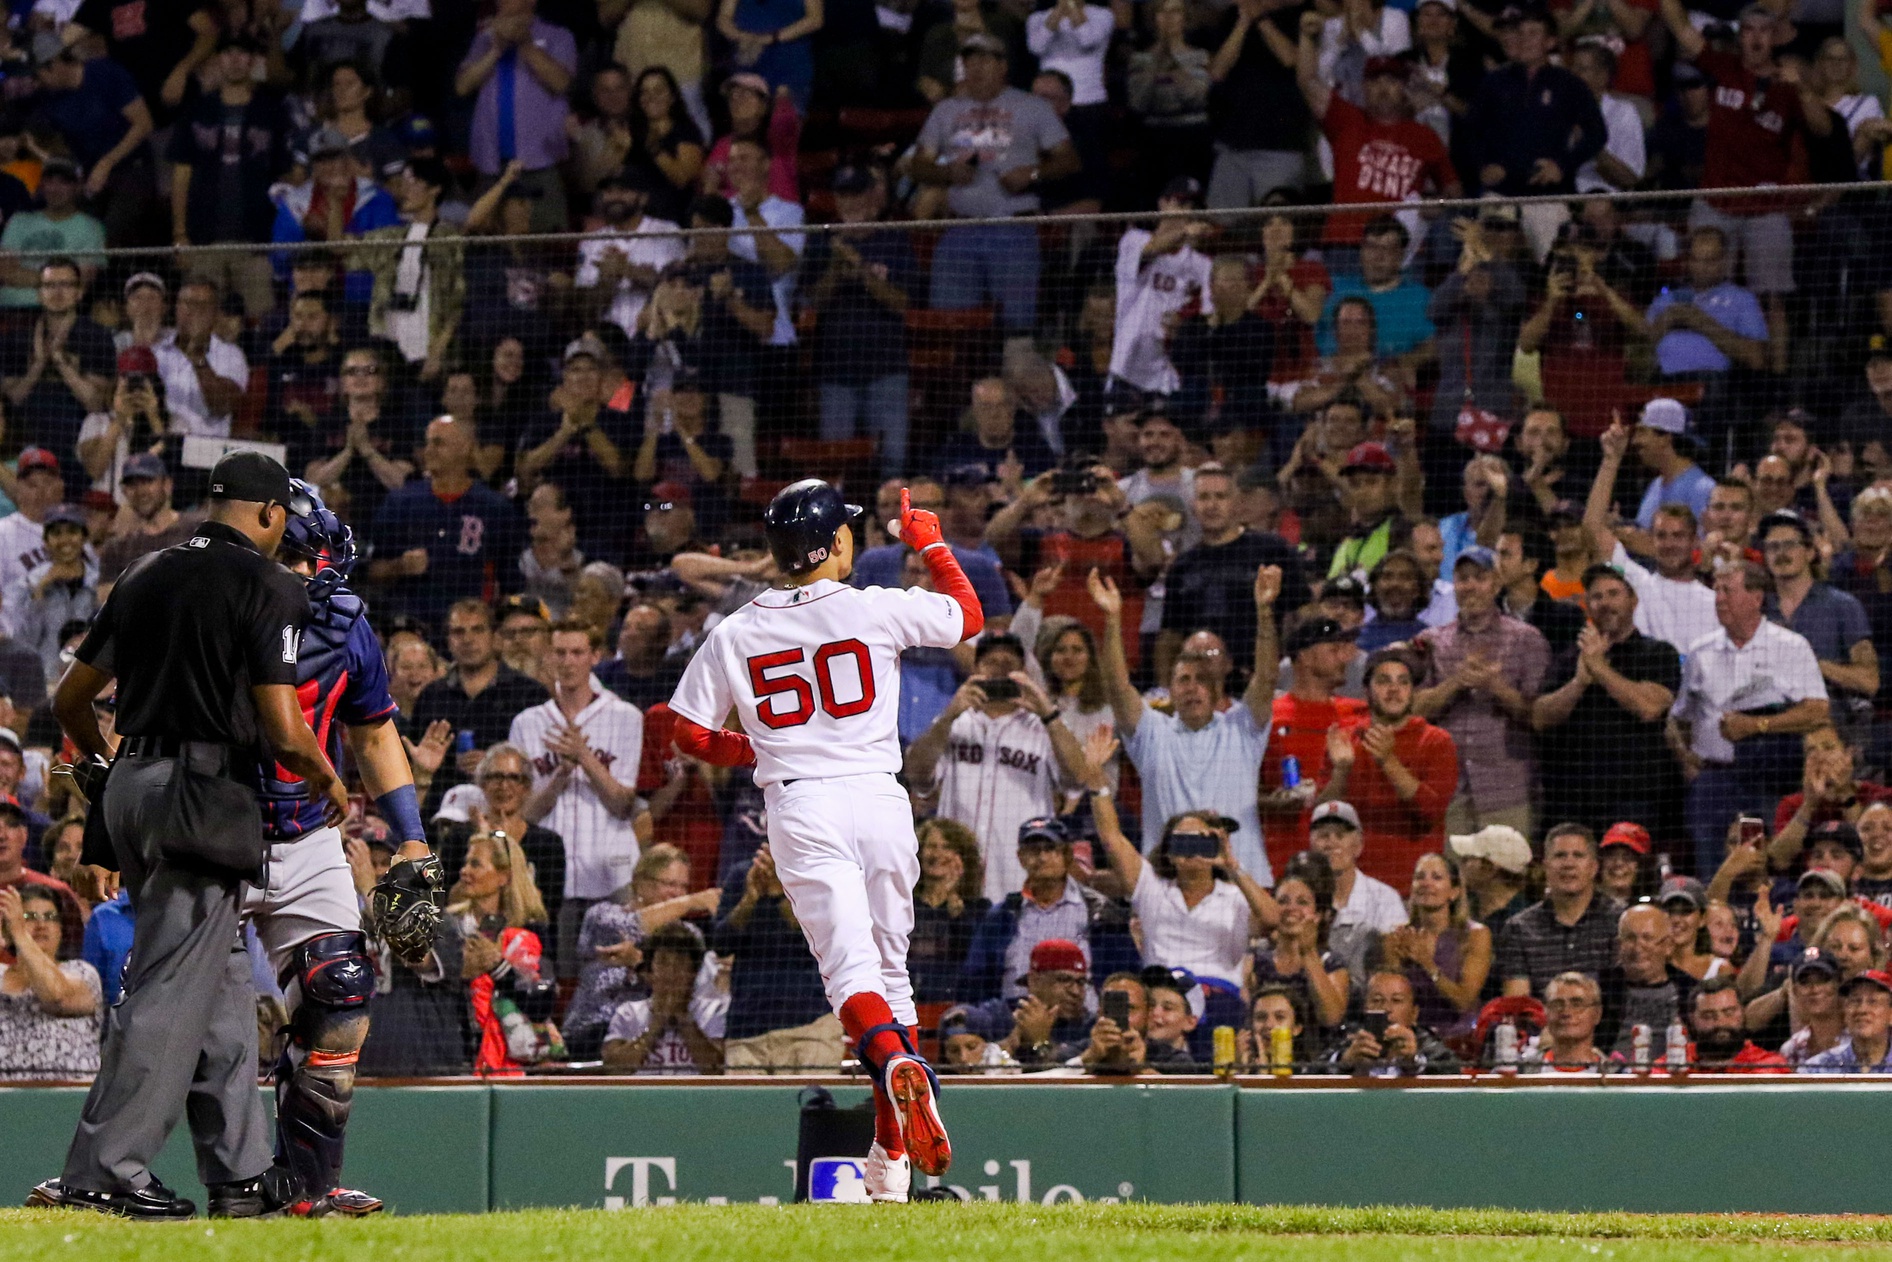 Mookie Betts to face Boston Red Sox at Fenway Park for the first time next  August 